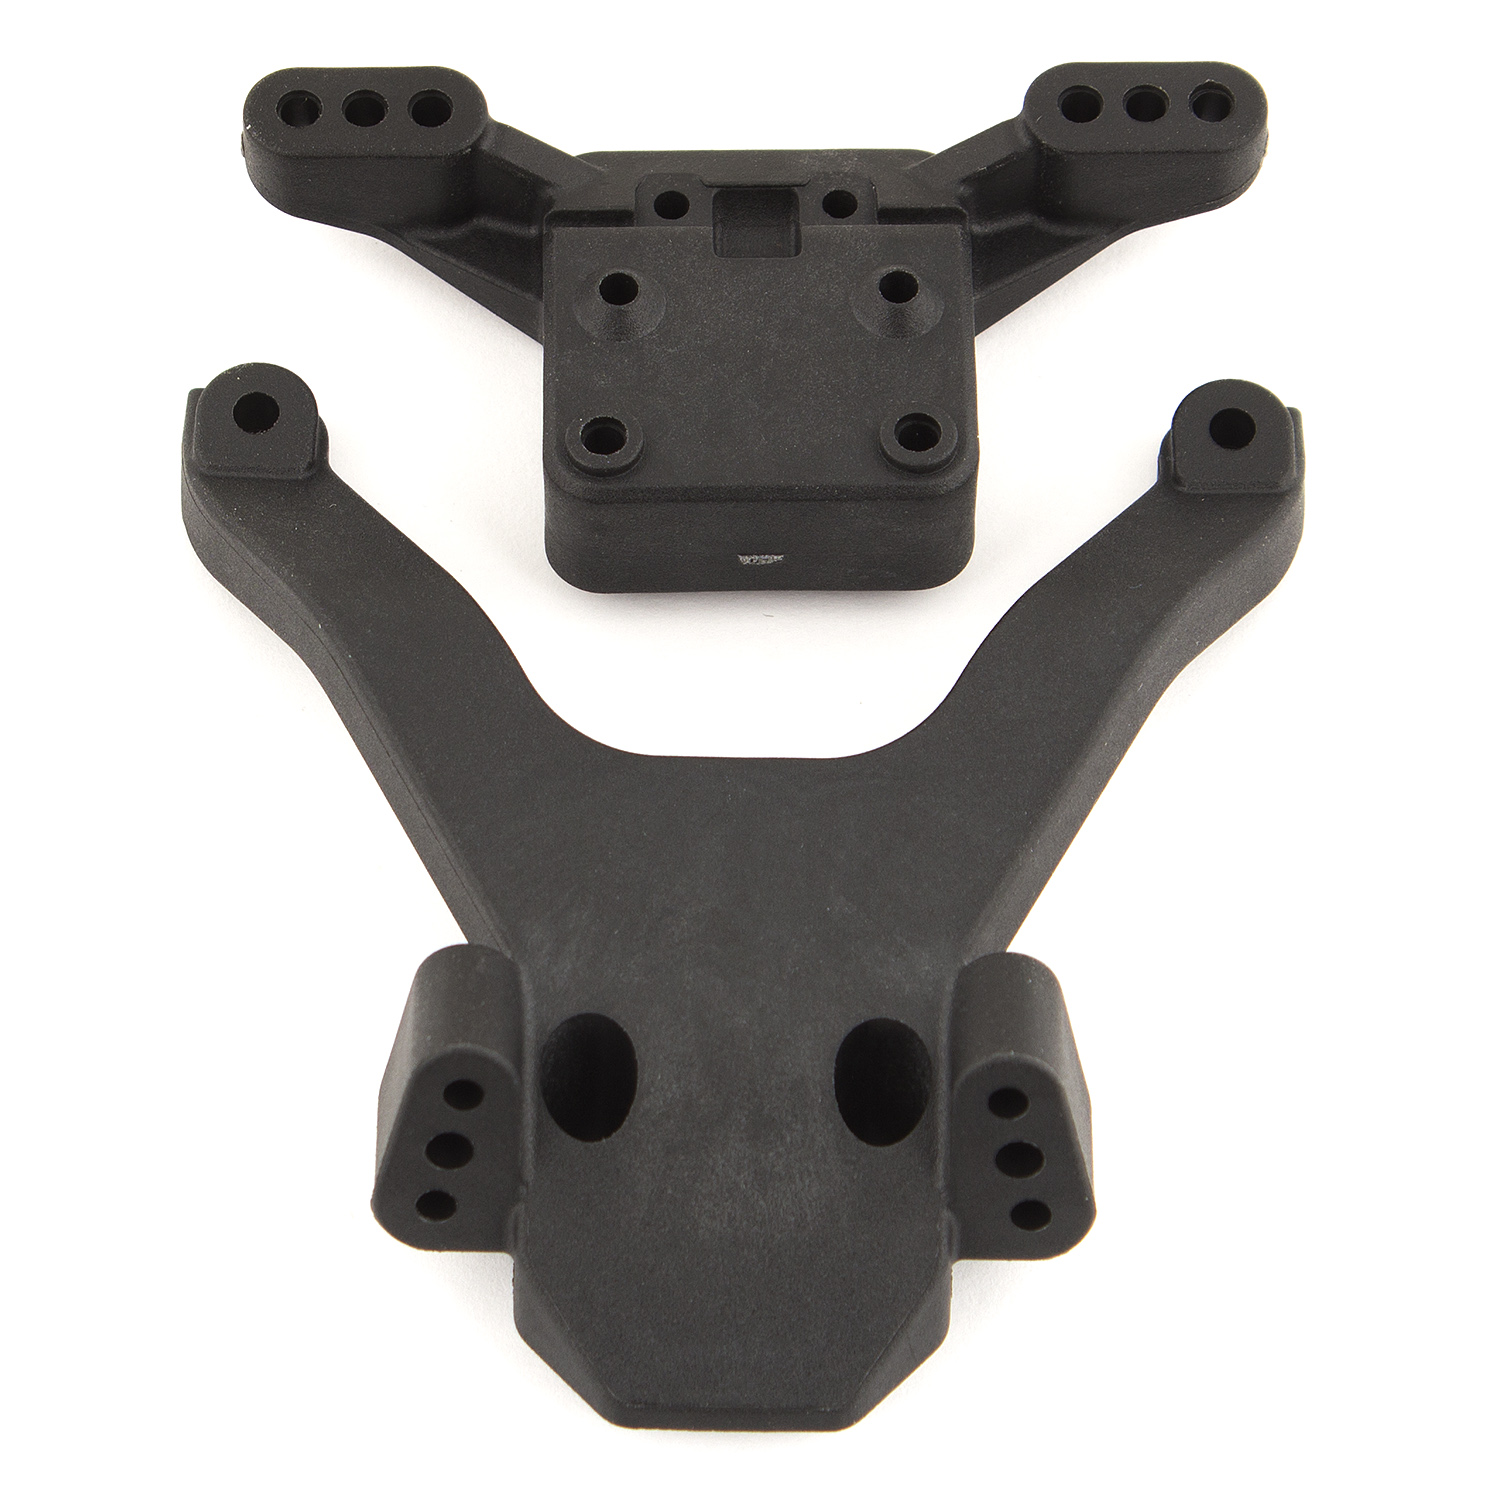 RC10B6.1 Top Plate and Ballstud Mount